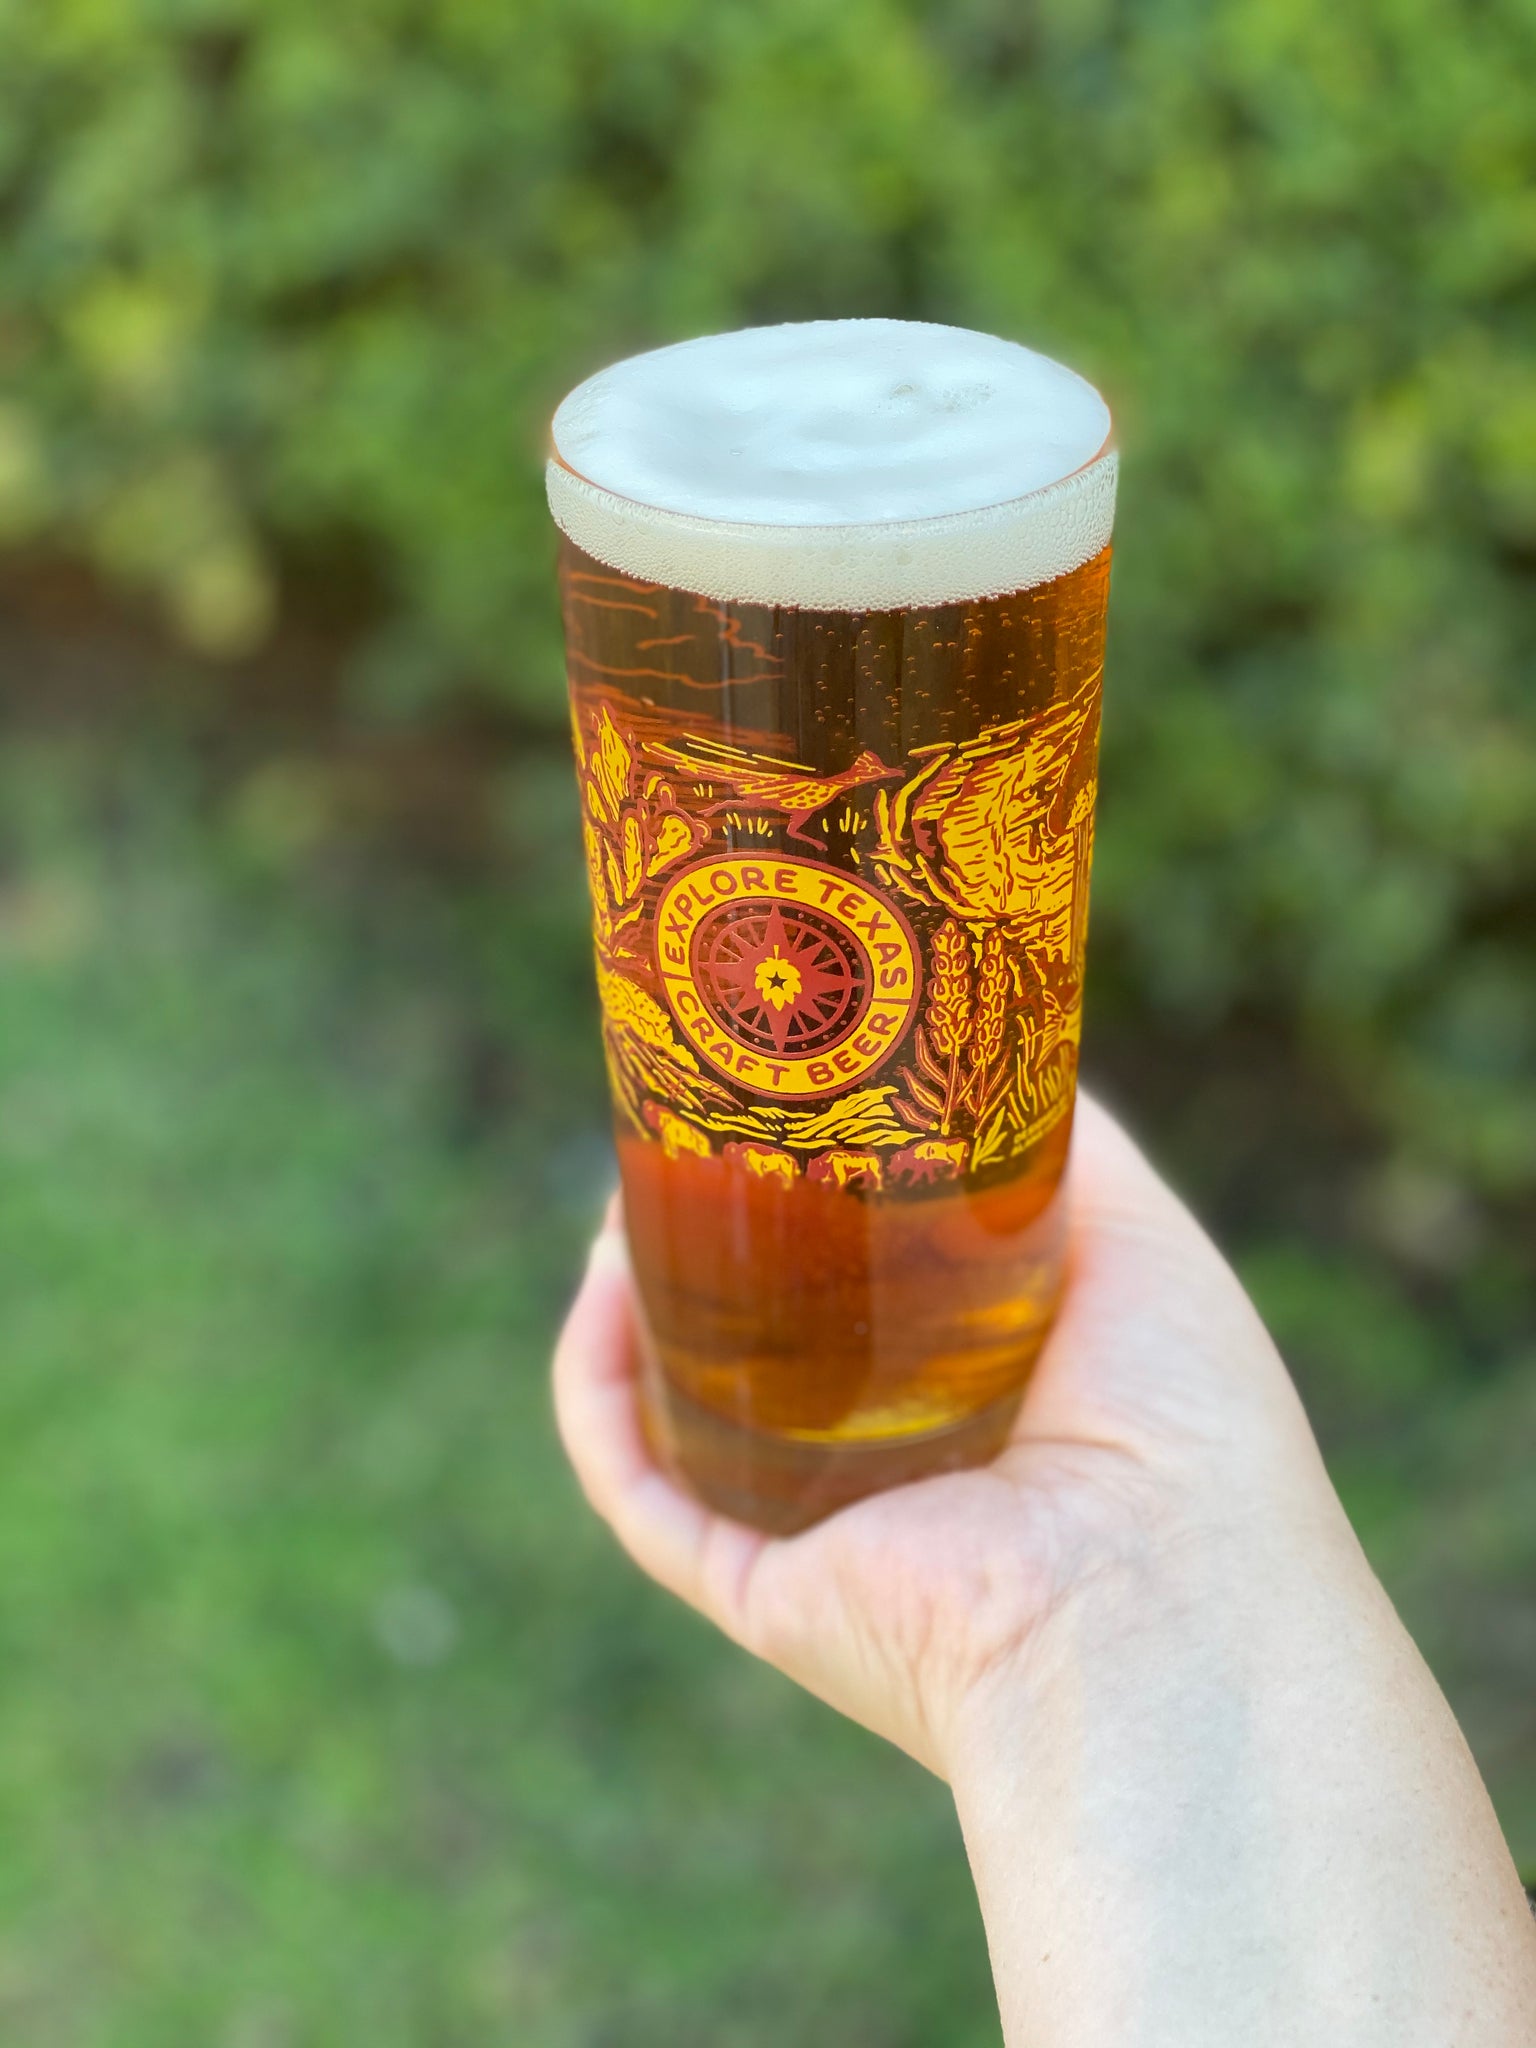 Small Business Saturday Glasses – Texas Craft Brewers Guild Store